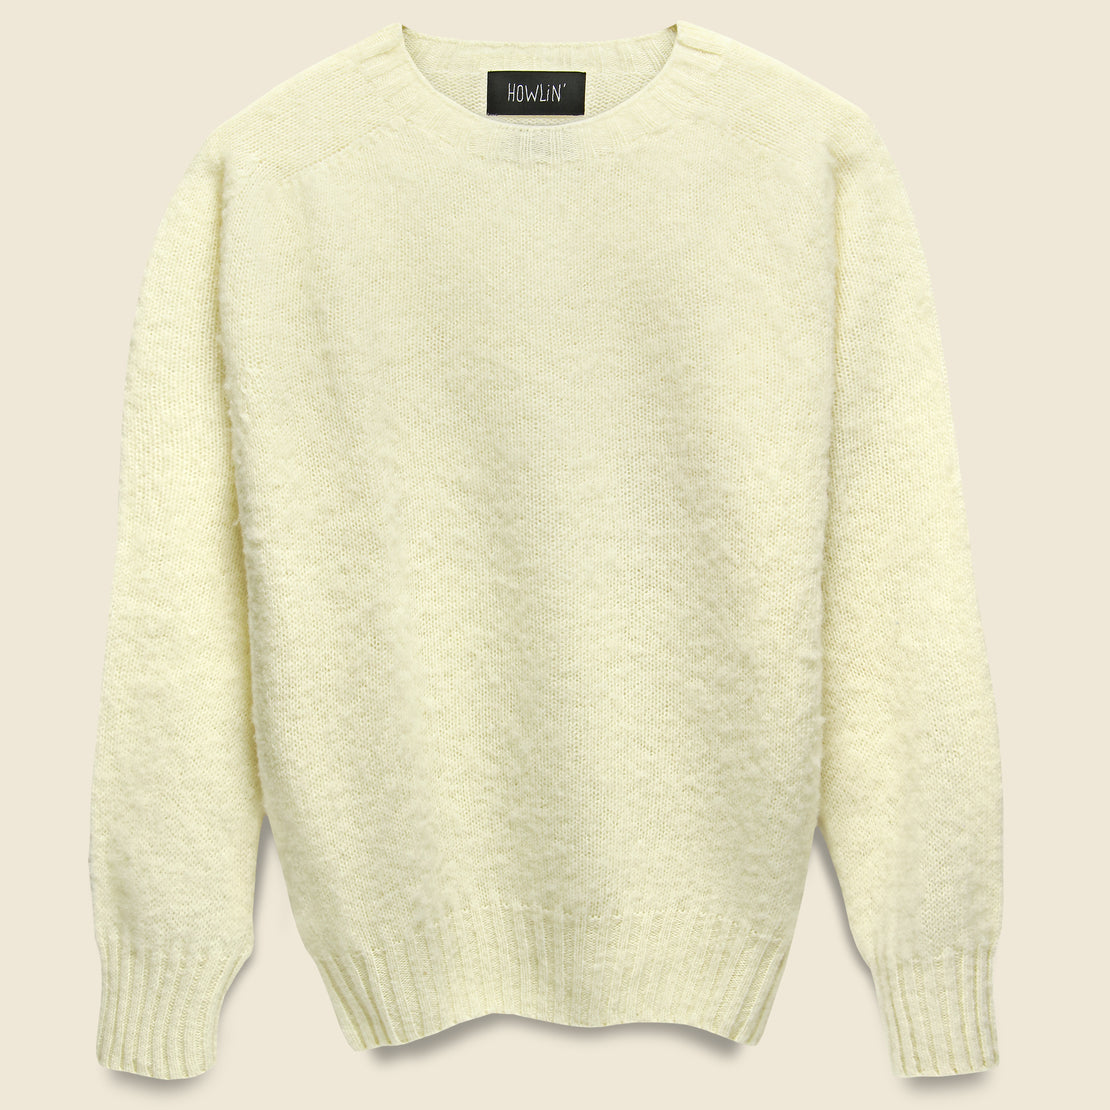 Howlin Babs Sweater - White